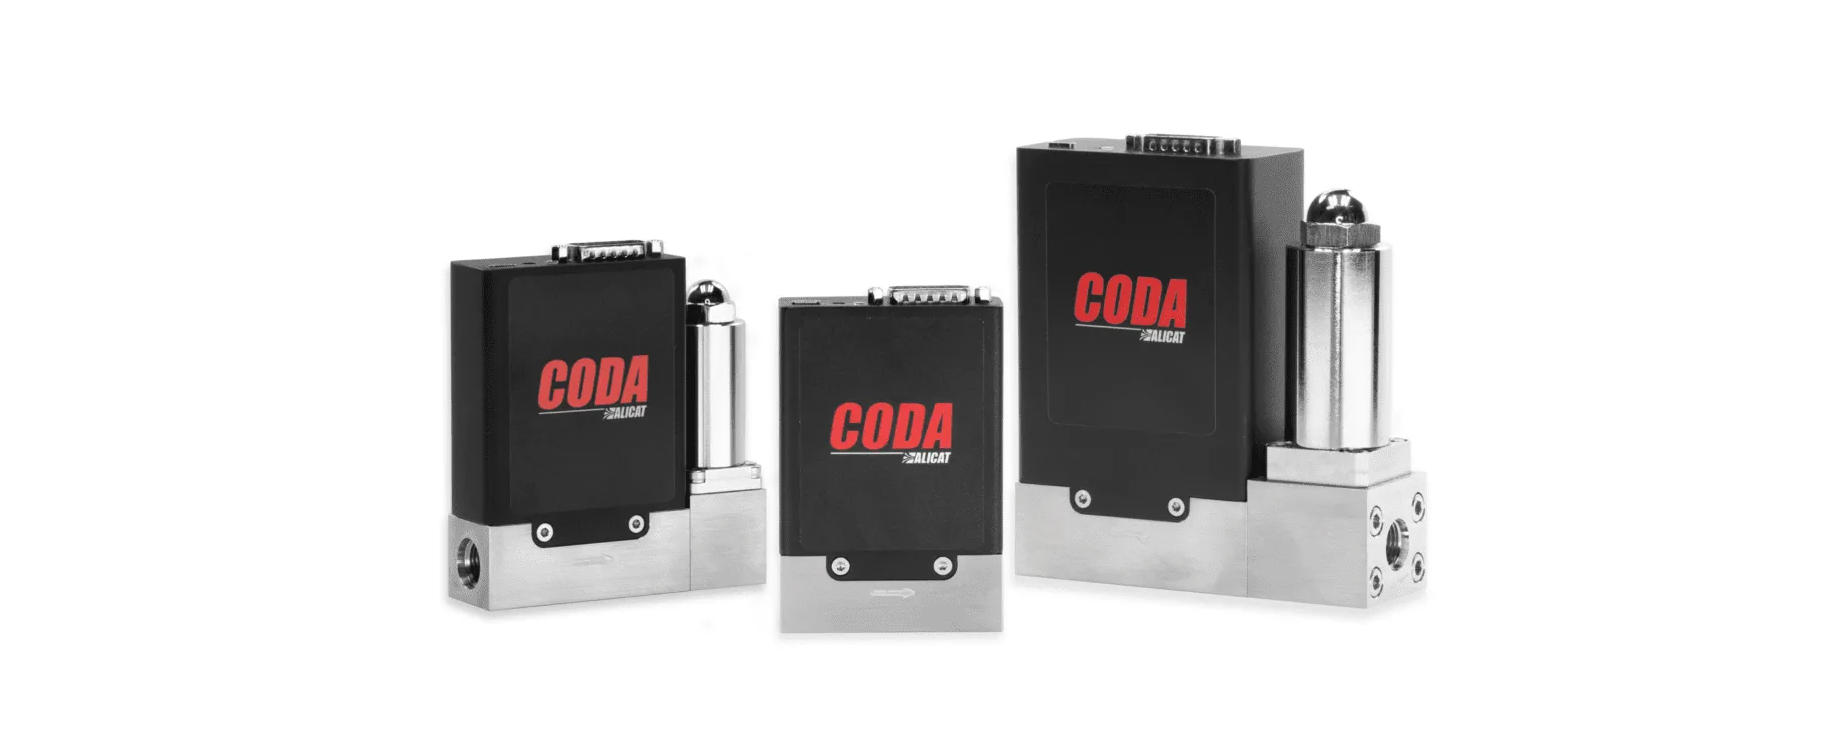 Three black and silver devices on a white background. CODA is written on the devices in large red letters.